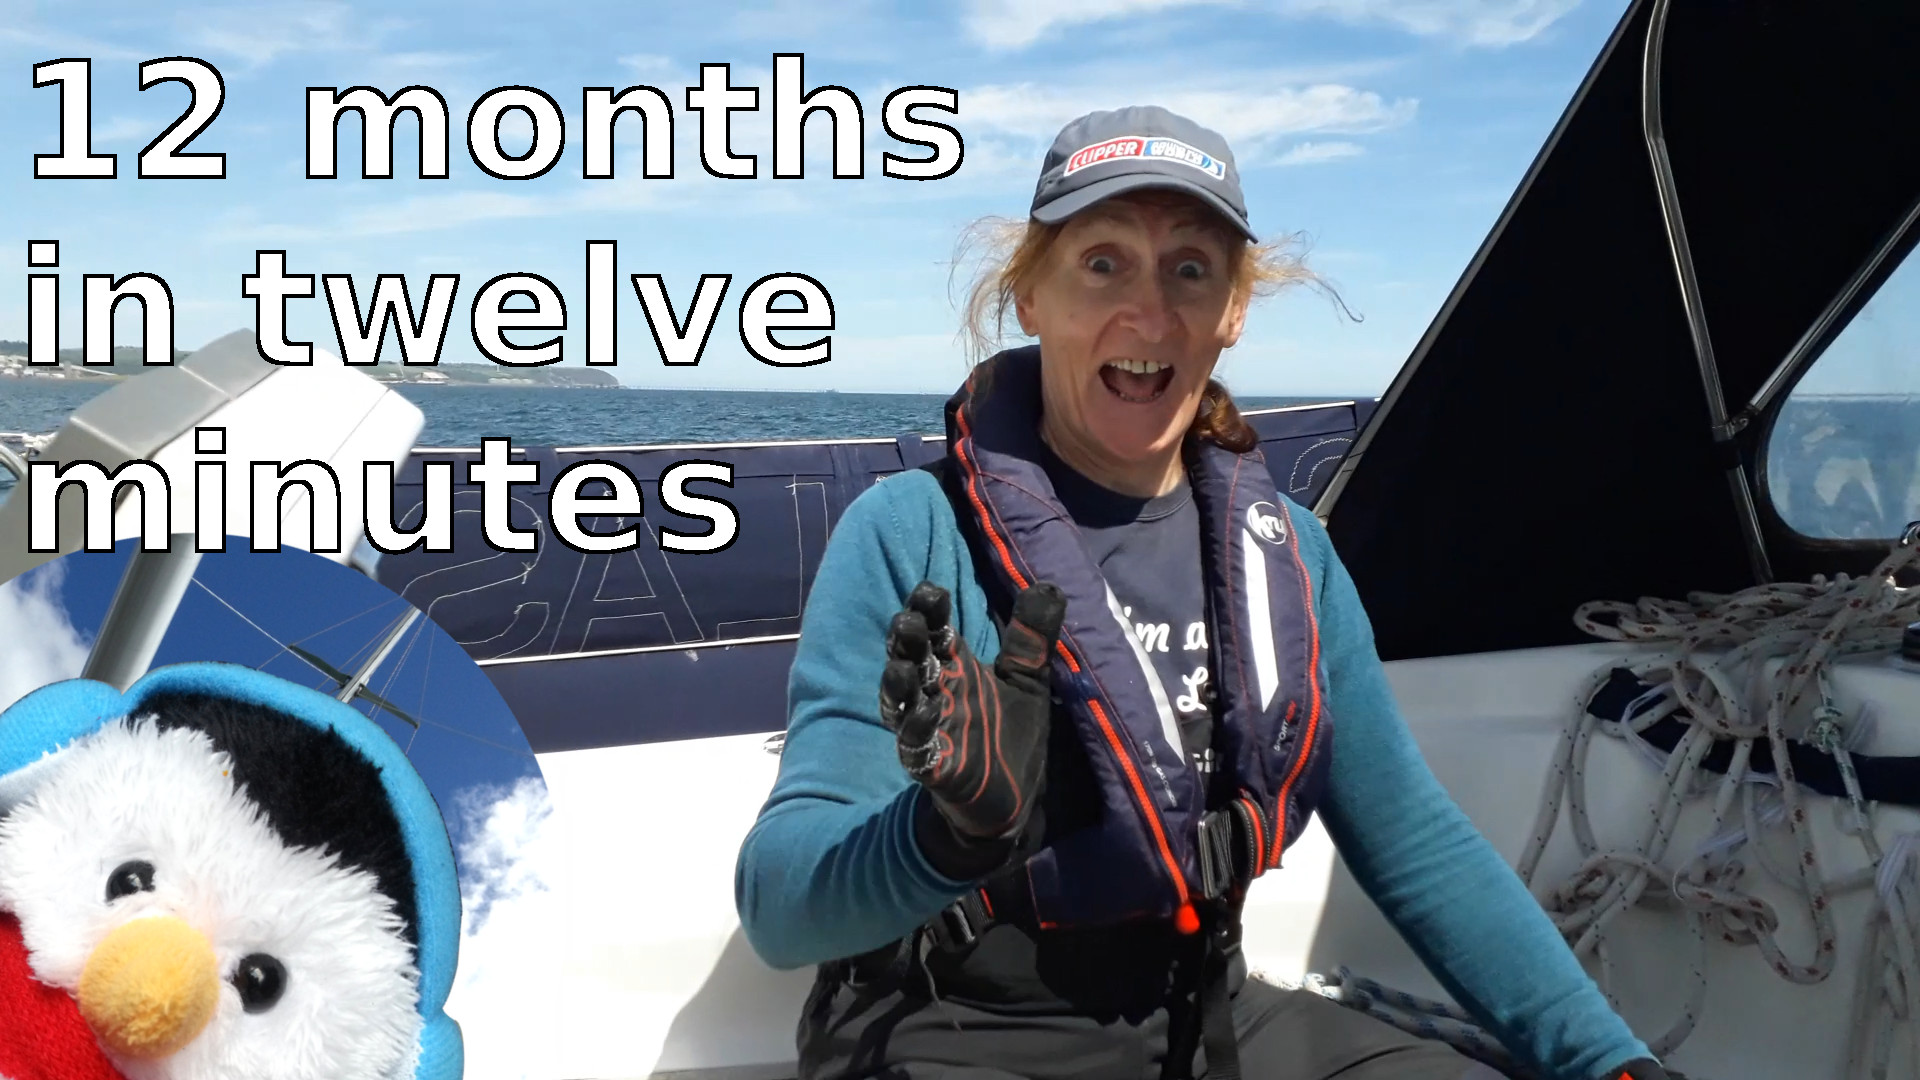 Watch our "12 months in 12 minutes" video and add comments etc